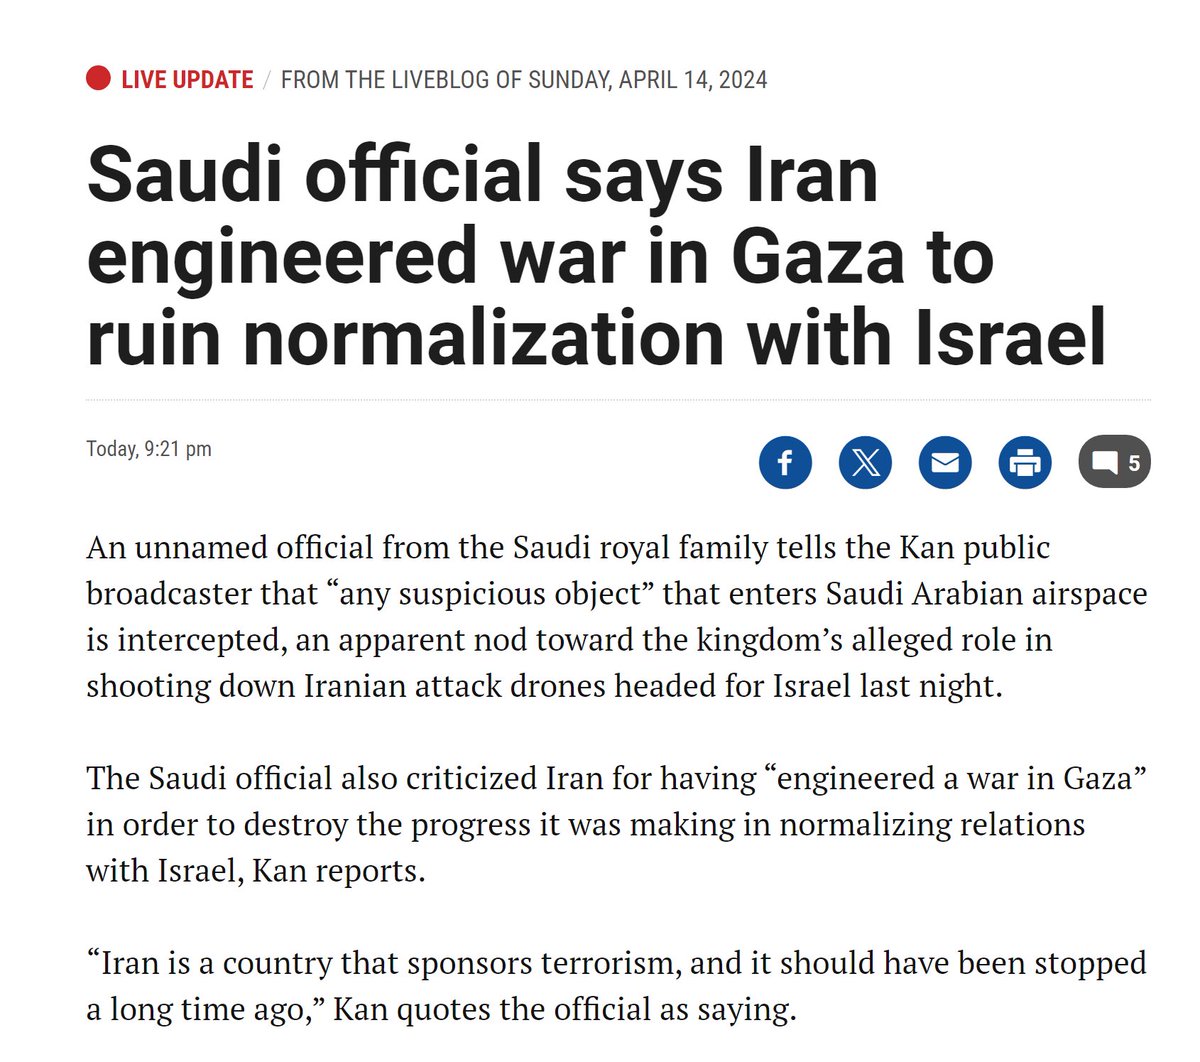 We all knew it, but it's good to have confirmation from Saudi Arabia. To those claiming Israel struck first, don't forget Iran's proxy network that's been attacking Israel for years! They provoked Israel on 10/7 and keep doing it. Don't fall for Iran's deception tactics! 🙅‍♂️…